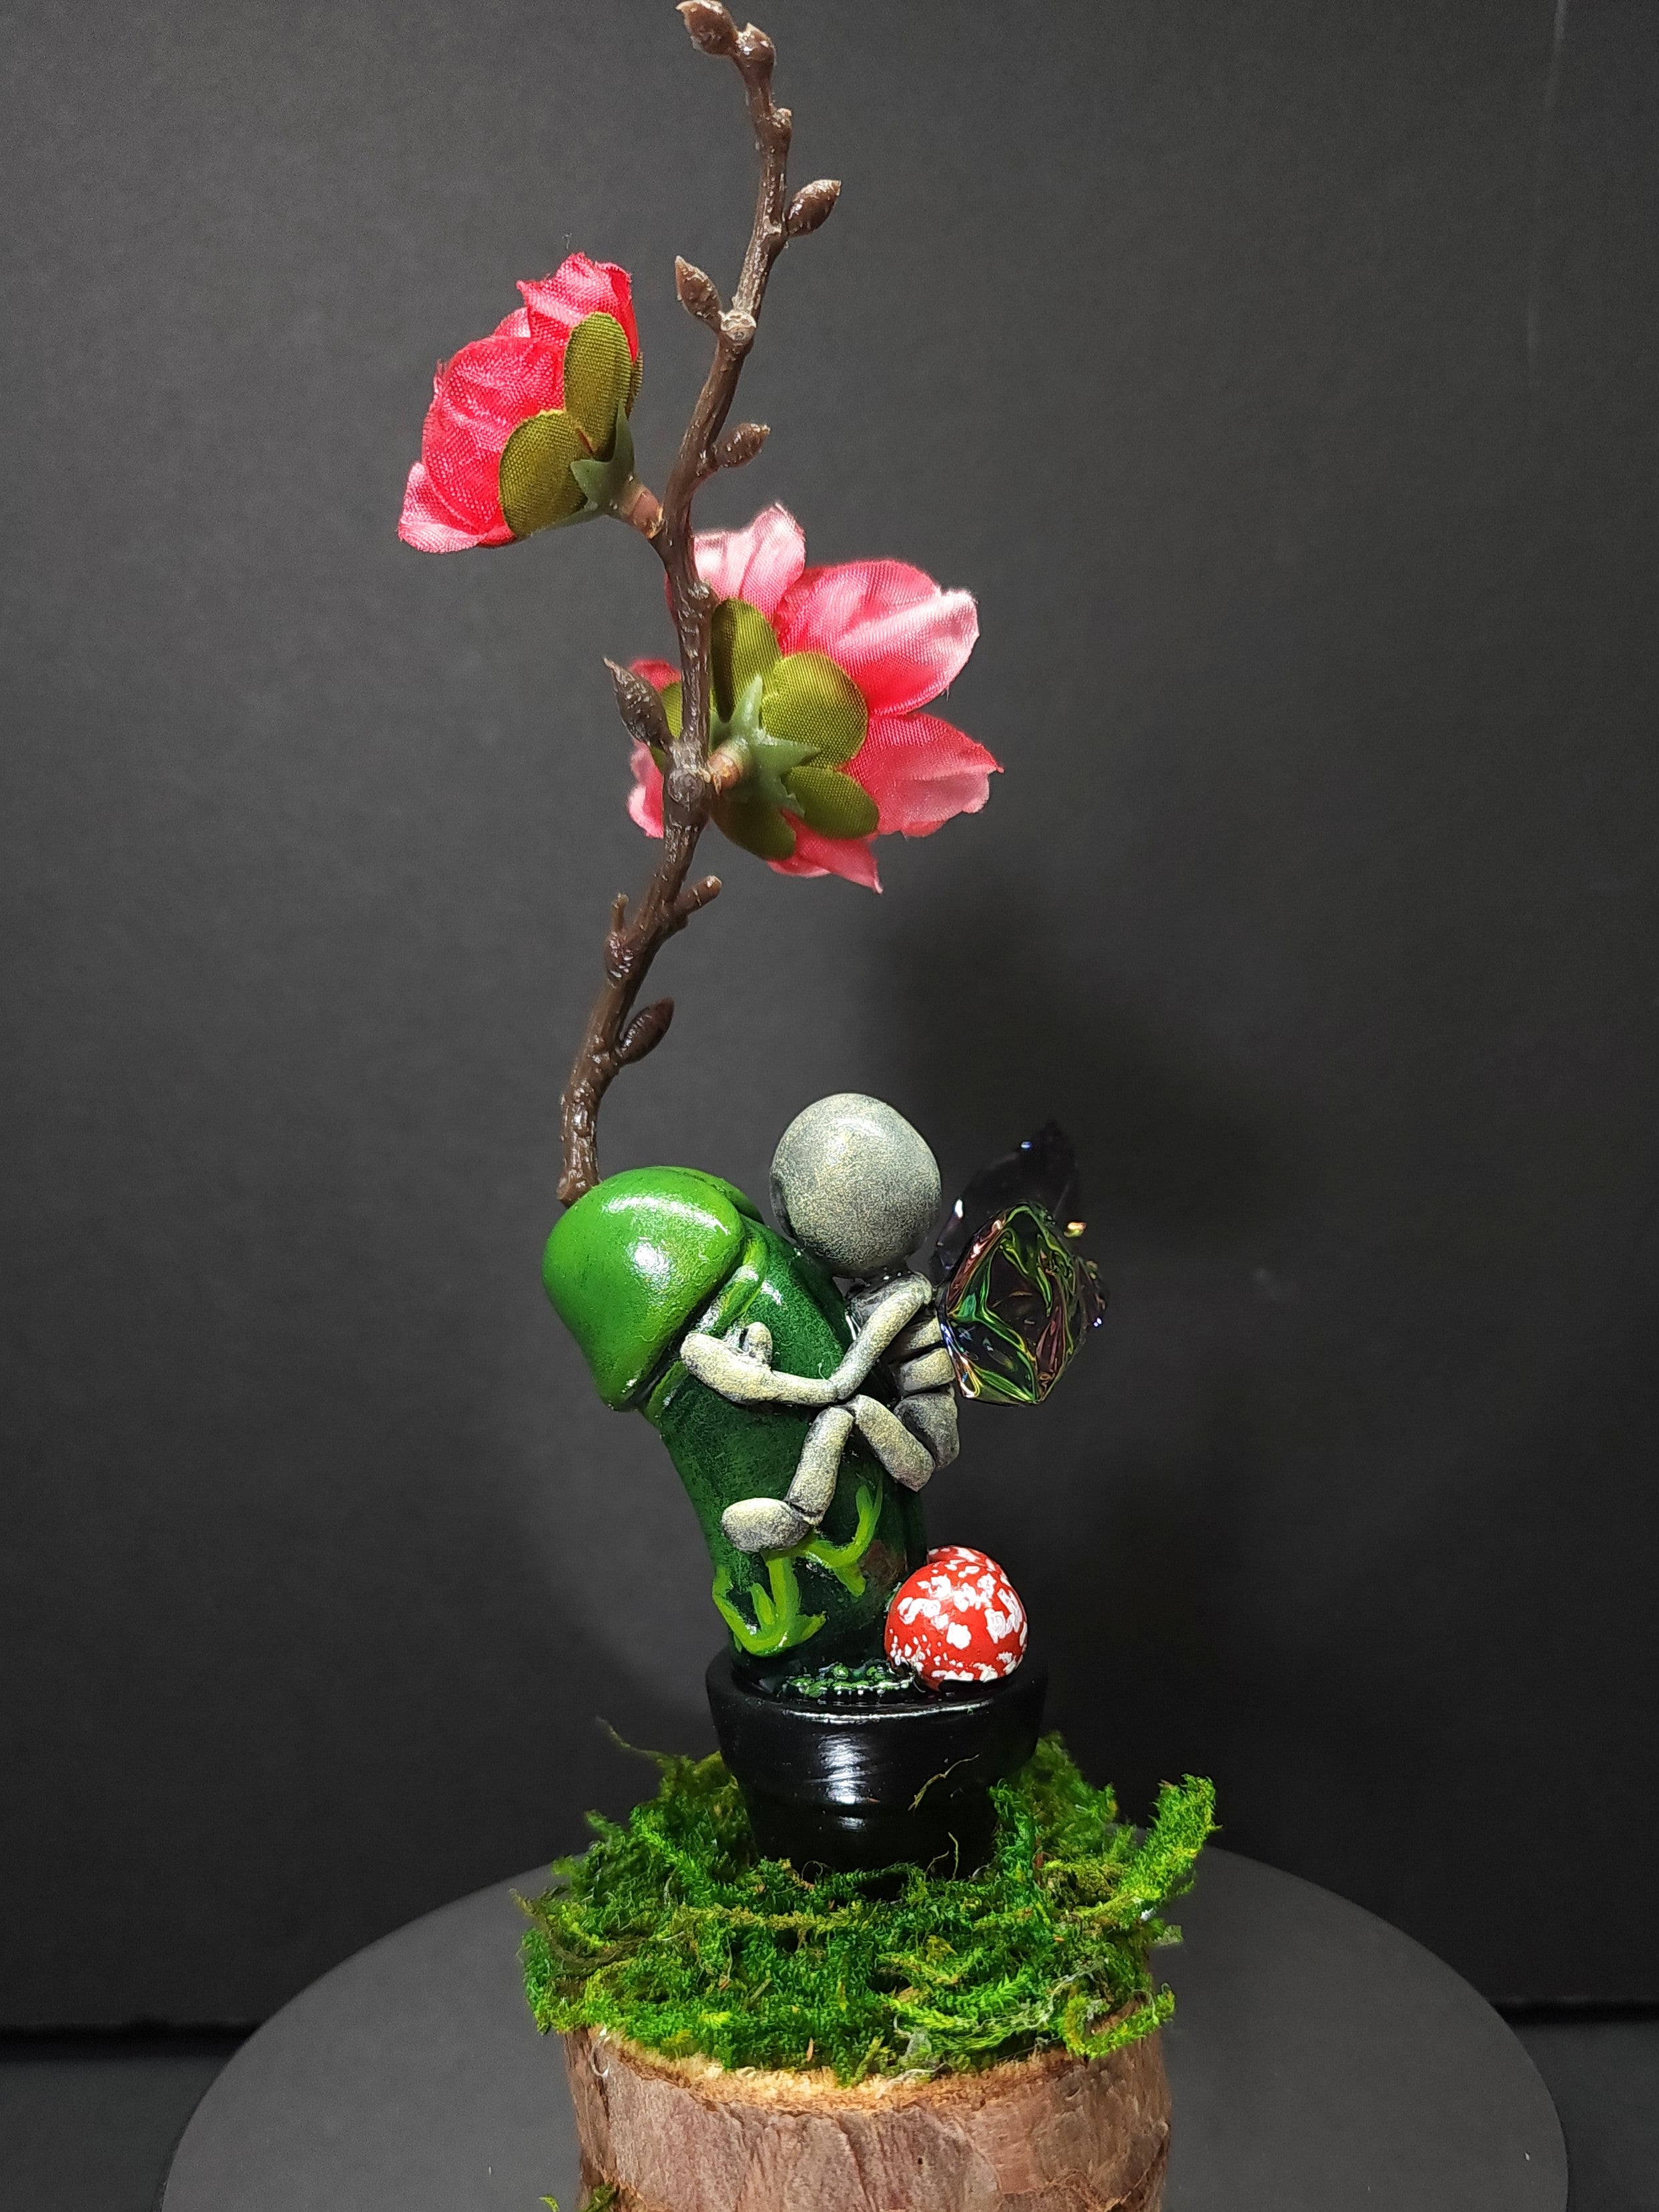 Polymer clay sculpture of a person holding a butterfly and flower, a mushroom, and a mossy stump.